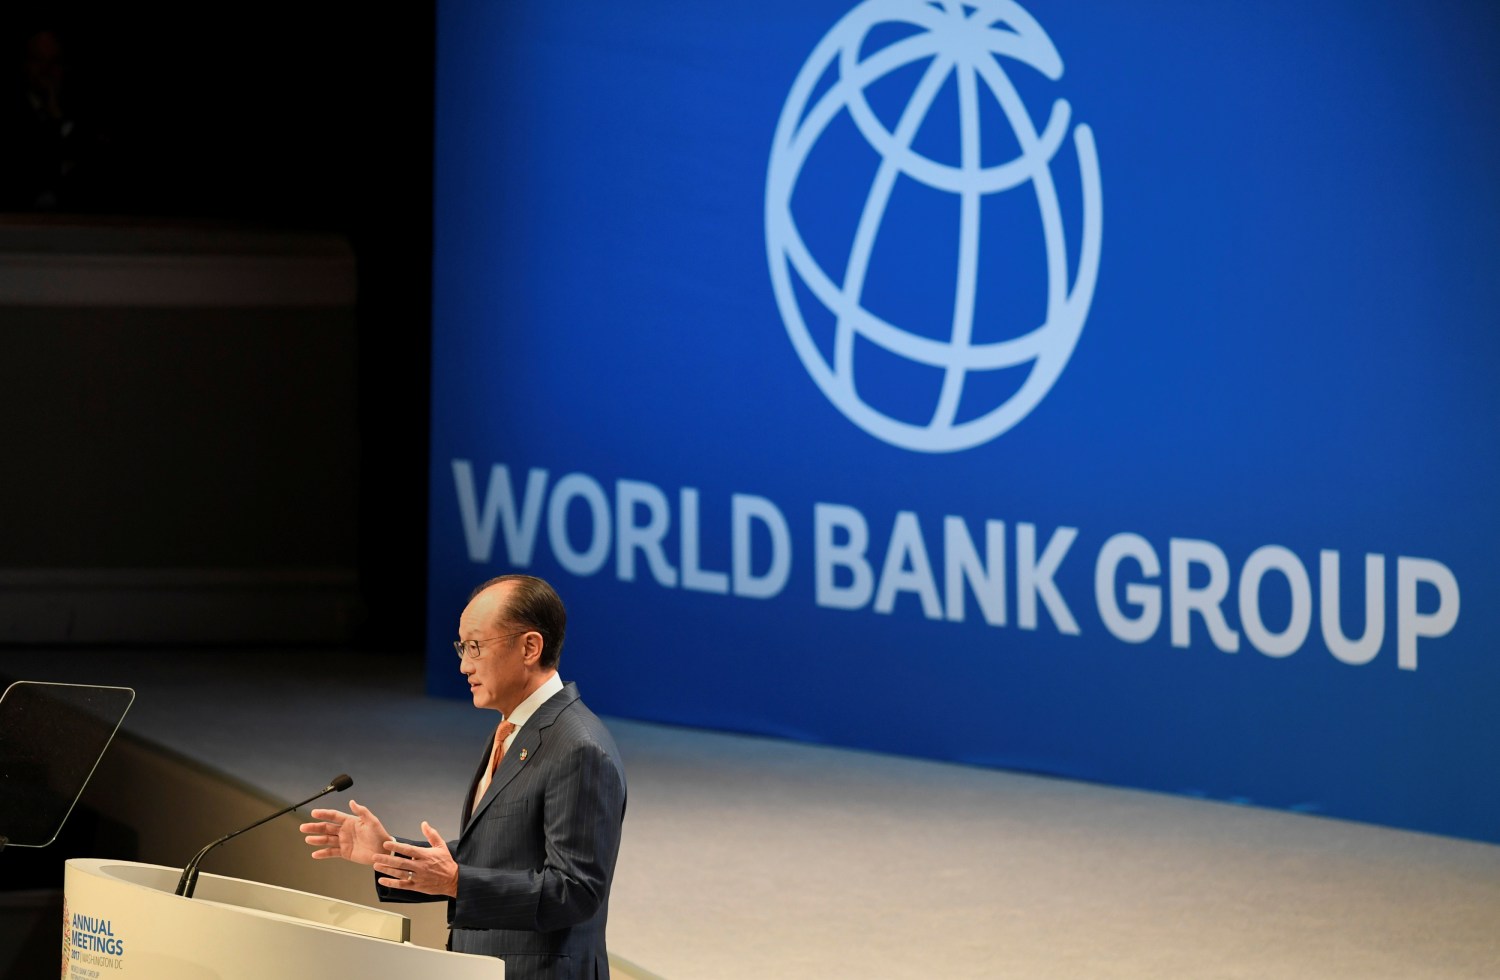 World Bank Group President Jim Yong Kim makes remarks at the Plenary Session of the IMF and World Bank's 2017 Annual Fall Meetings, in Washington, U.S., October 13, 2017.   REUTERS/Mike Theiler - RC1820C71280